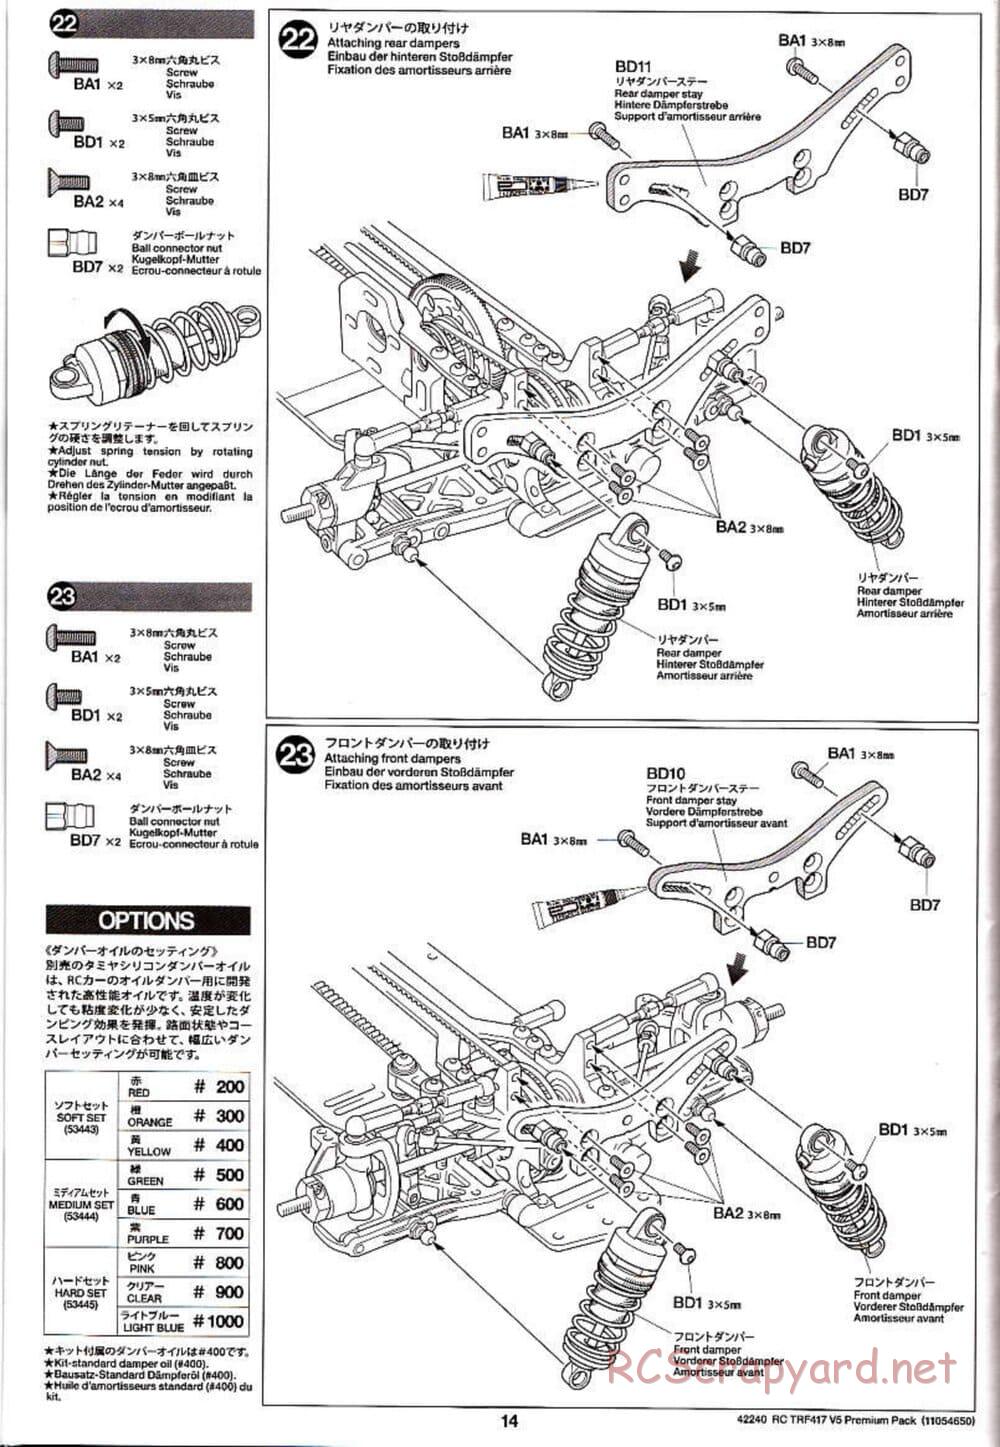 Tamiya - TRF417 V5 Premium Package Chassis - Manual - Page 14